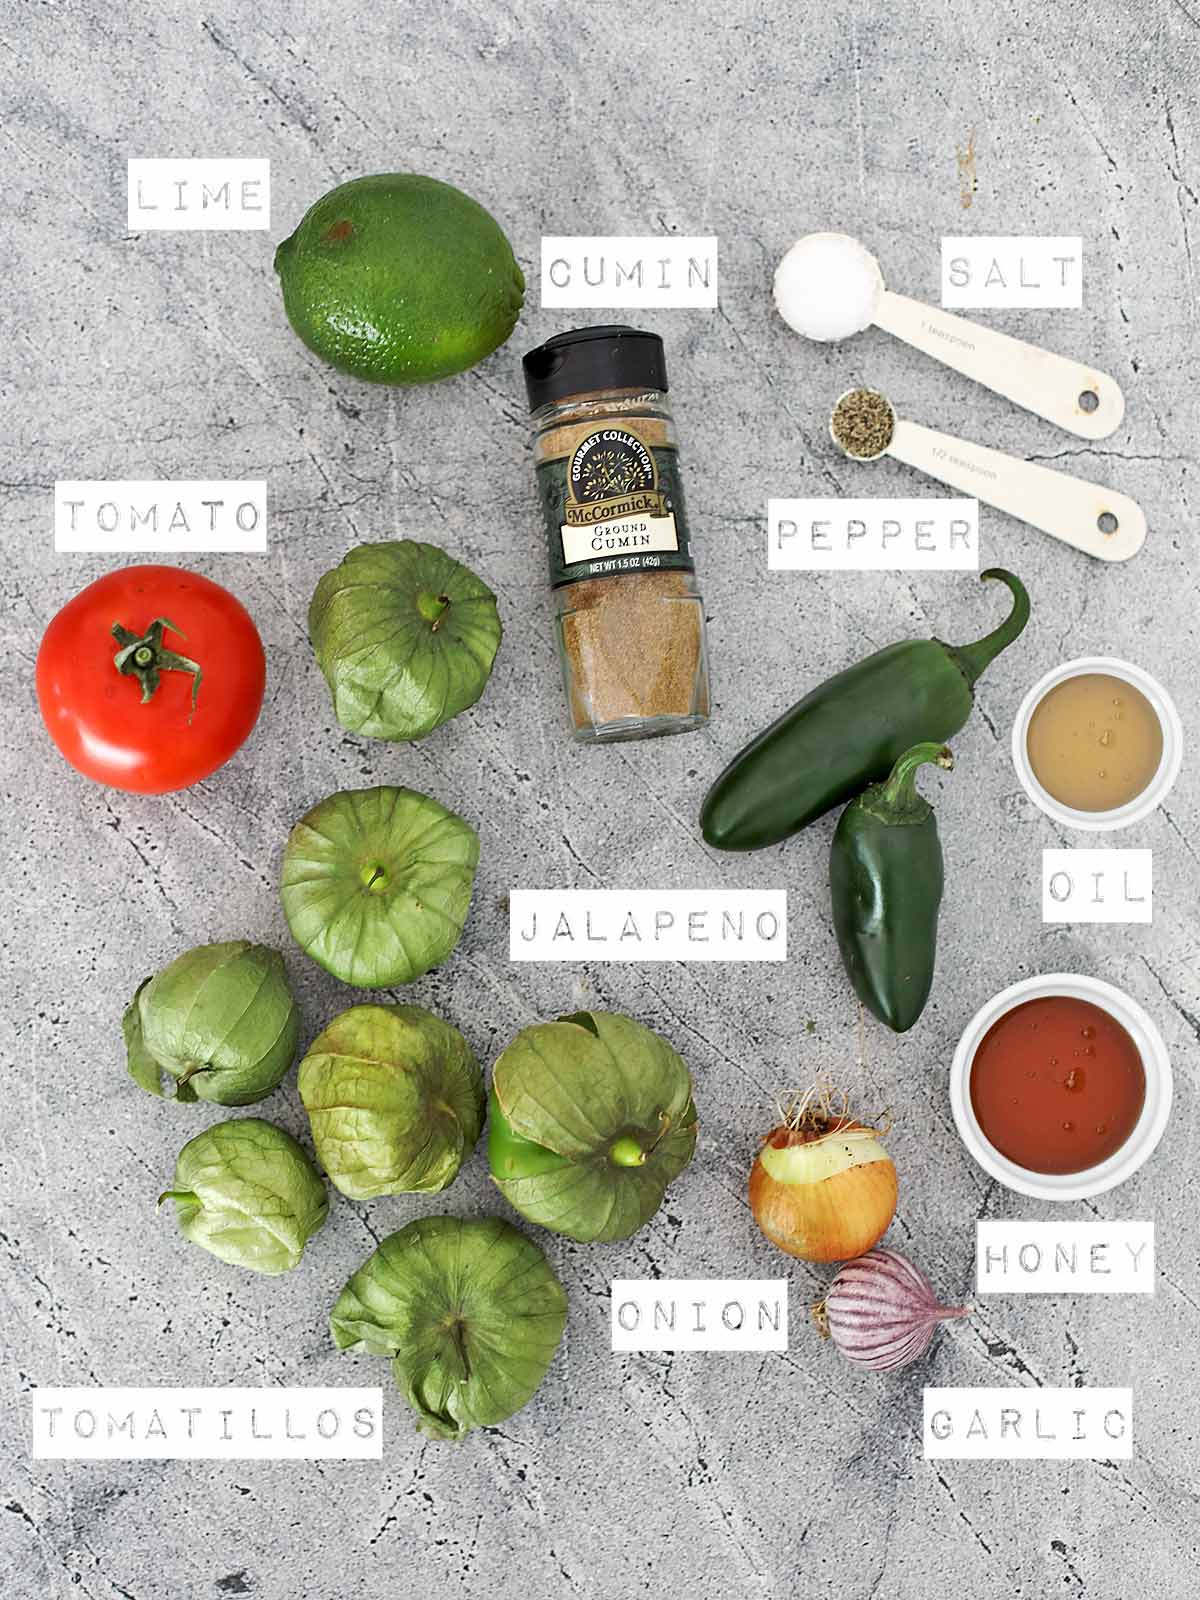 All the ingredients to make Chipotle Style Green Chili Salsa Recipe on a cement countertop.